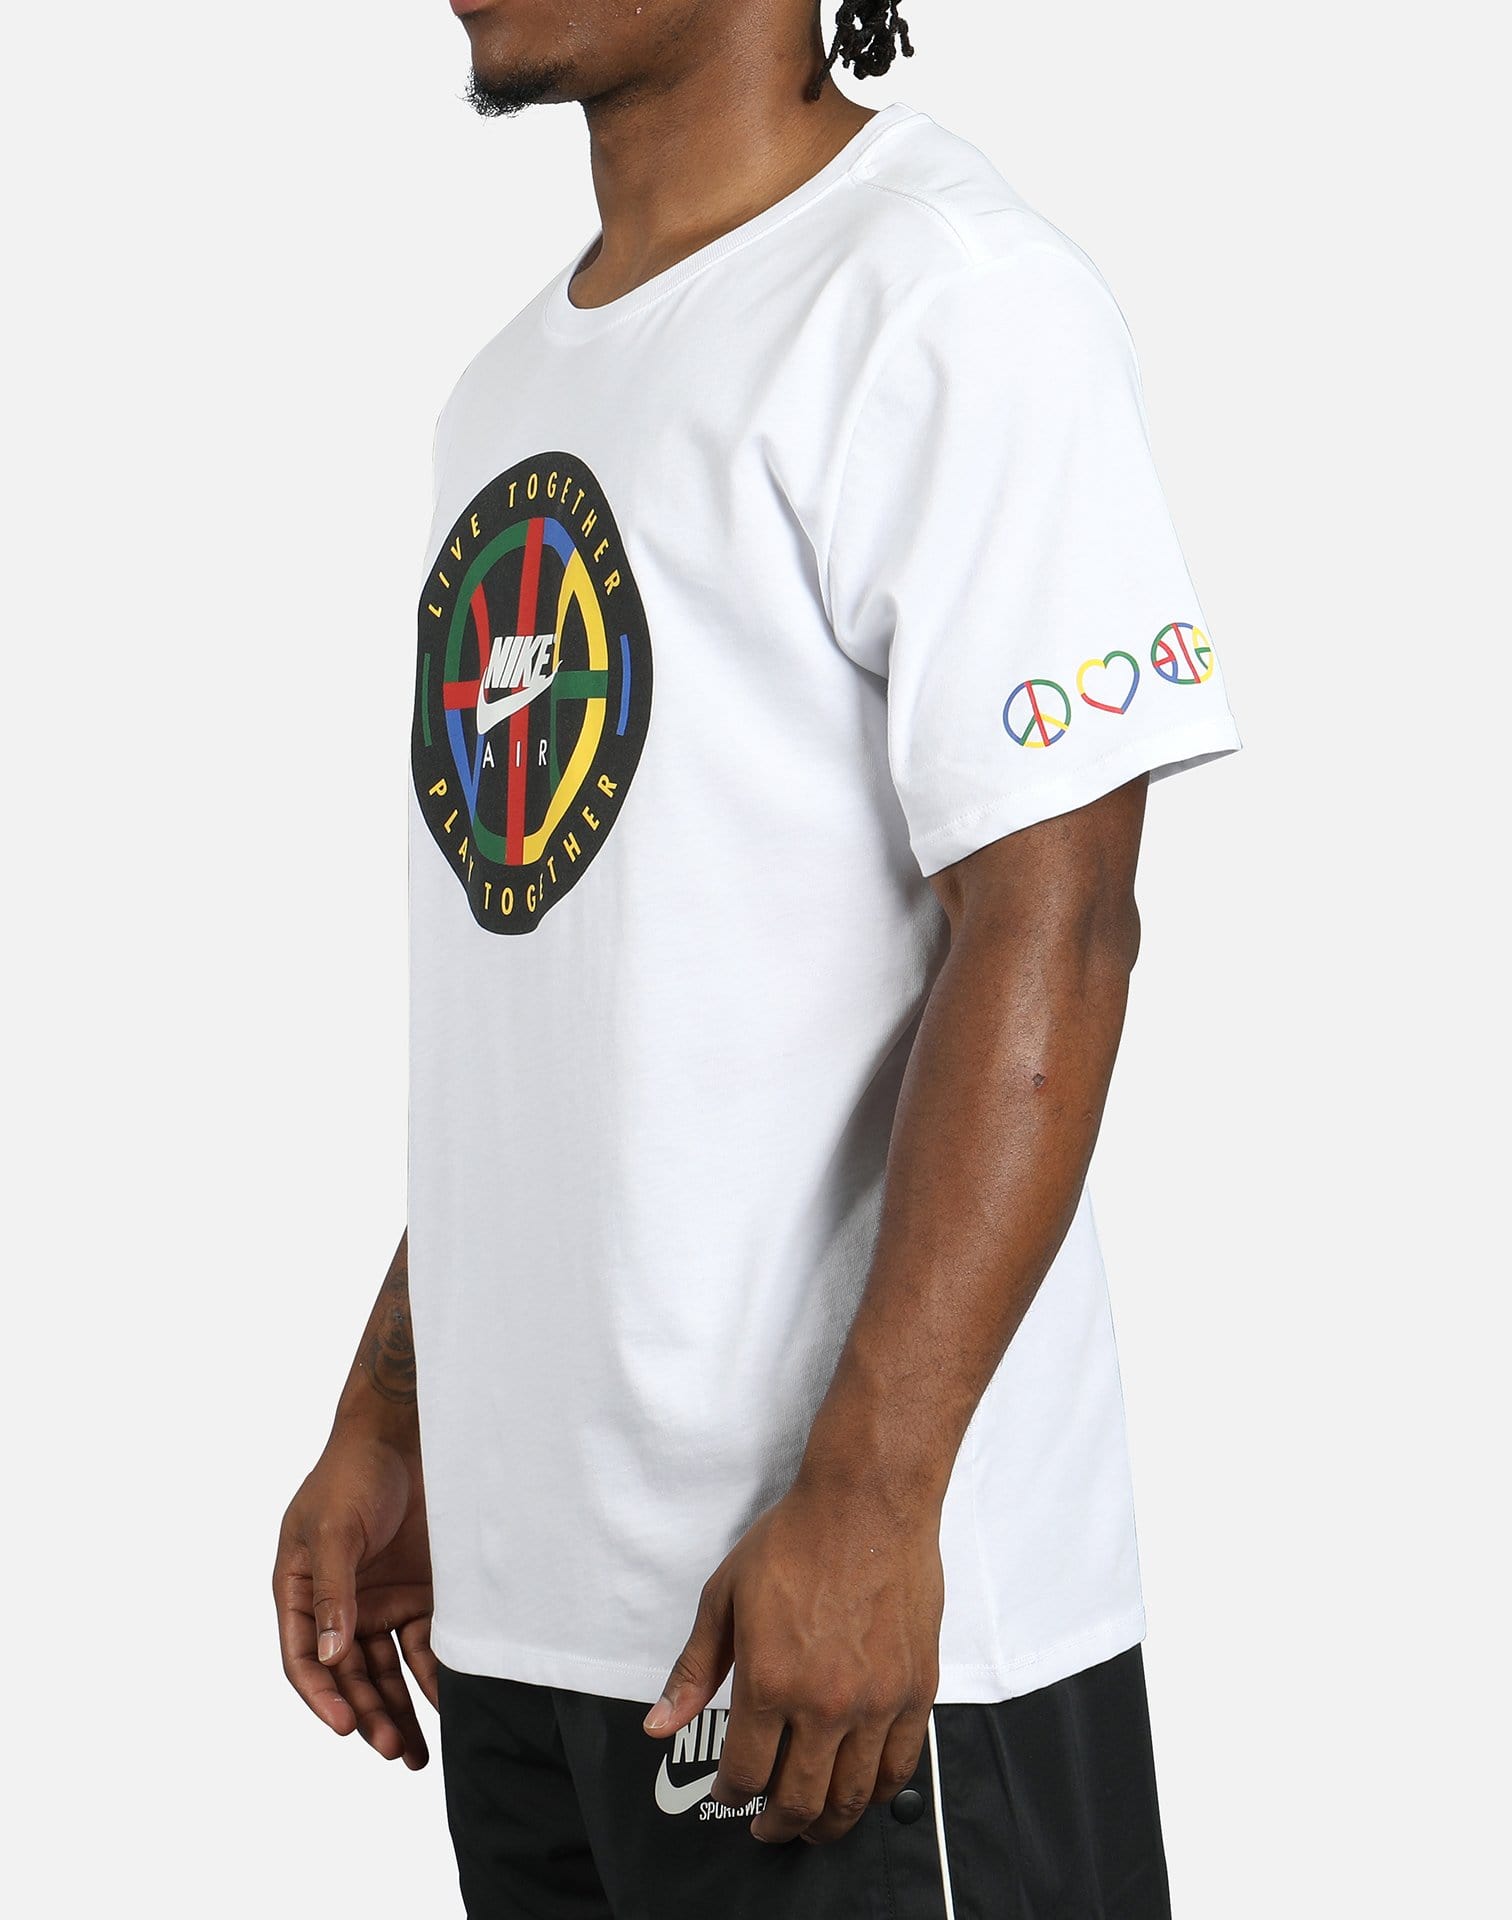 Nike NSW Men's Play Together Tee